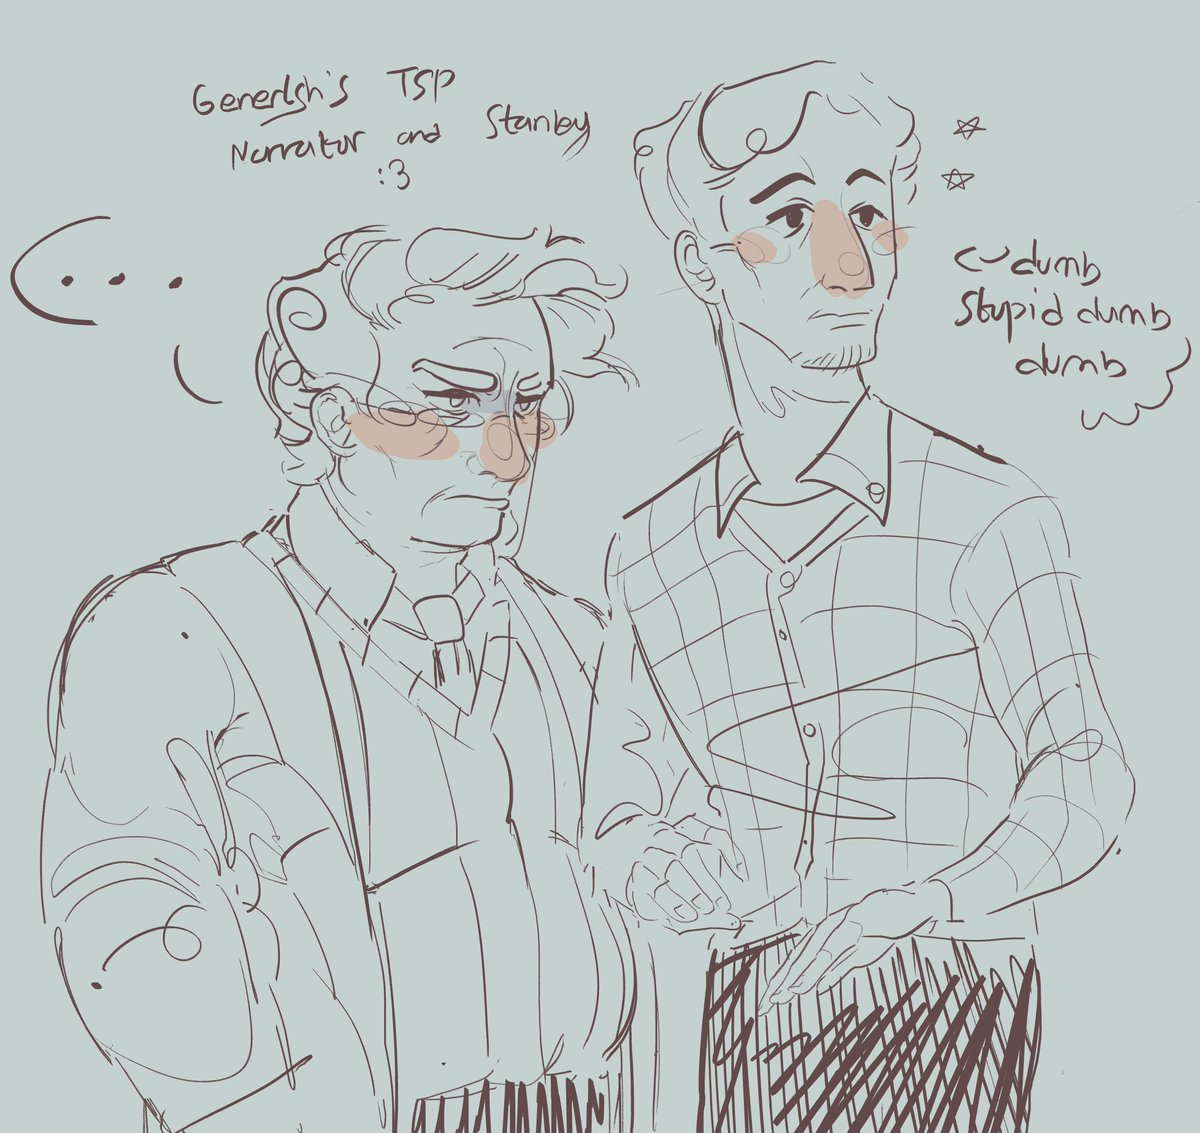 VERY MESSY Sketch of my TSP men
#TSP #TheStanleyParable